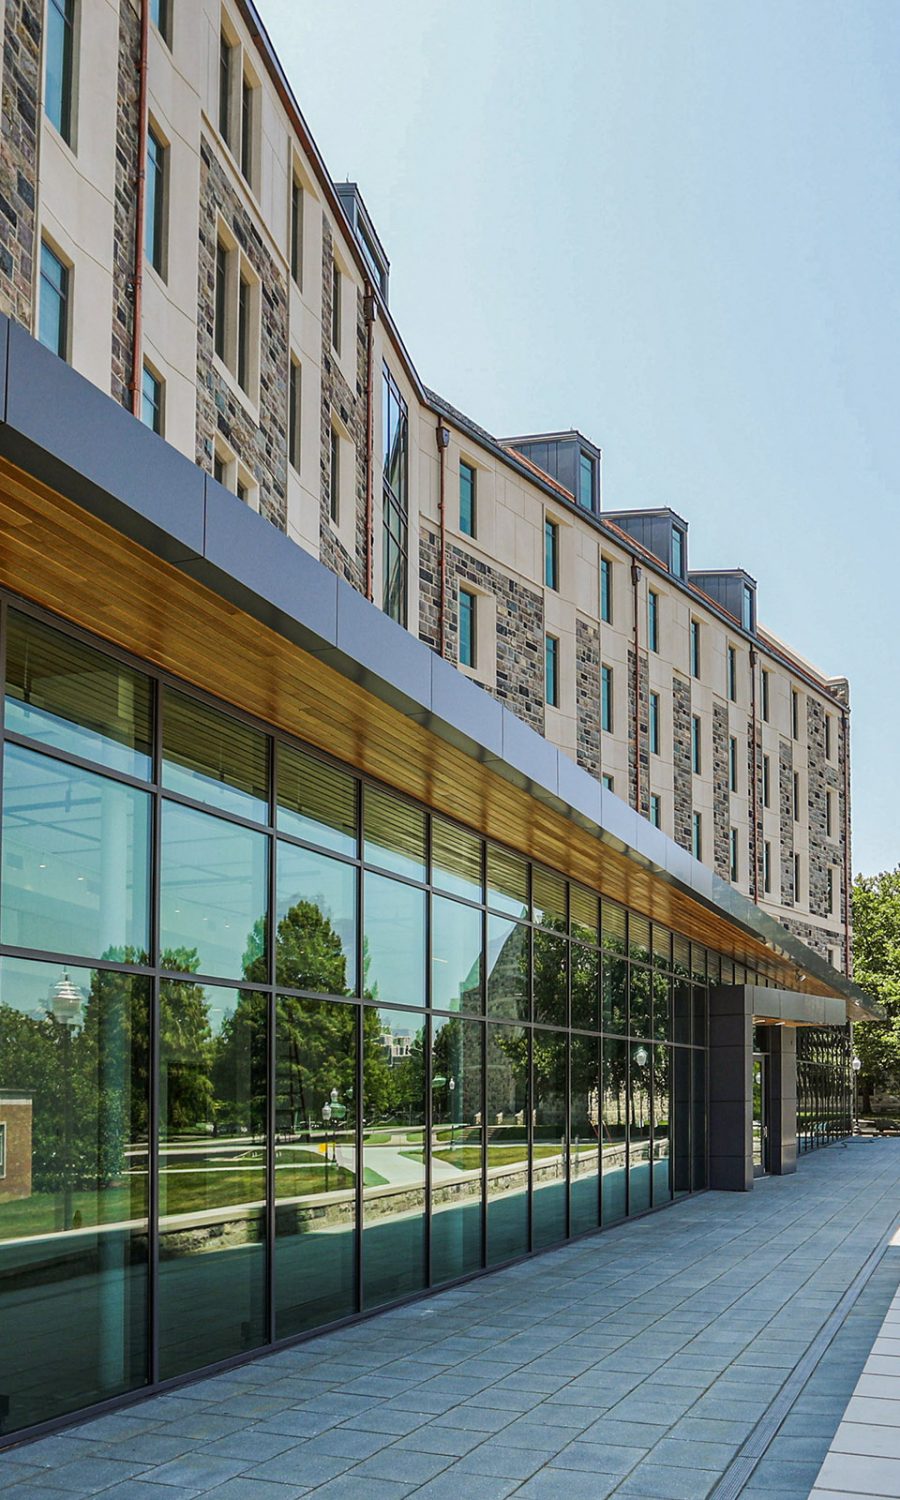 August 2, 2021 - Virginia Tech’s newest housing facility, the Creativity and Innovation District, will house over 500 students, starting August 14, 2021. (Photo by Mary Desmond/Virginia Tech)